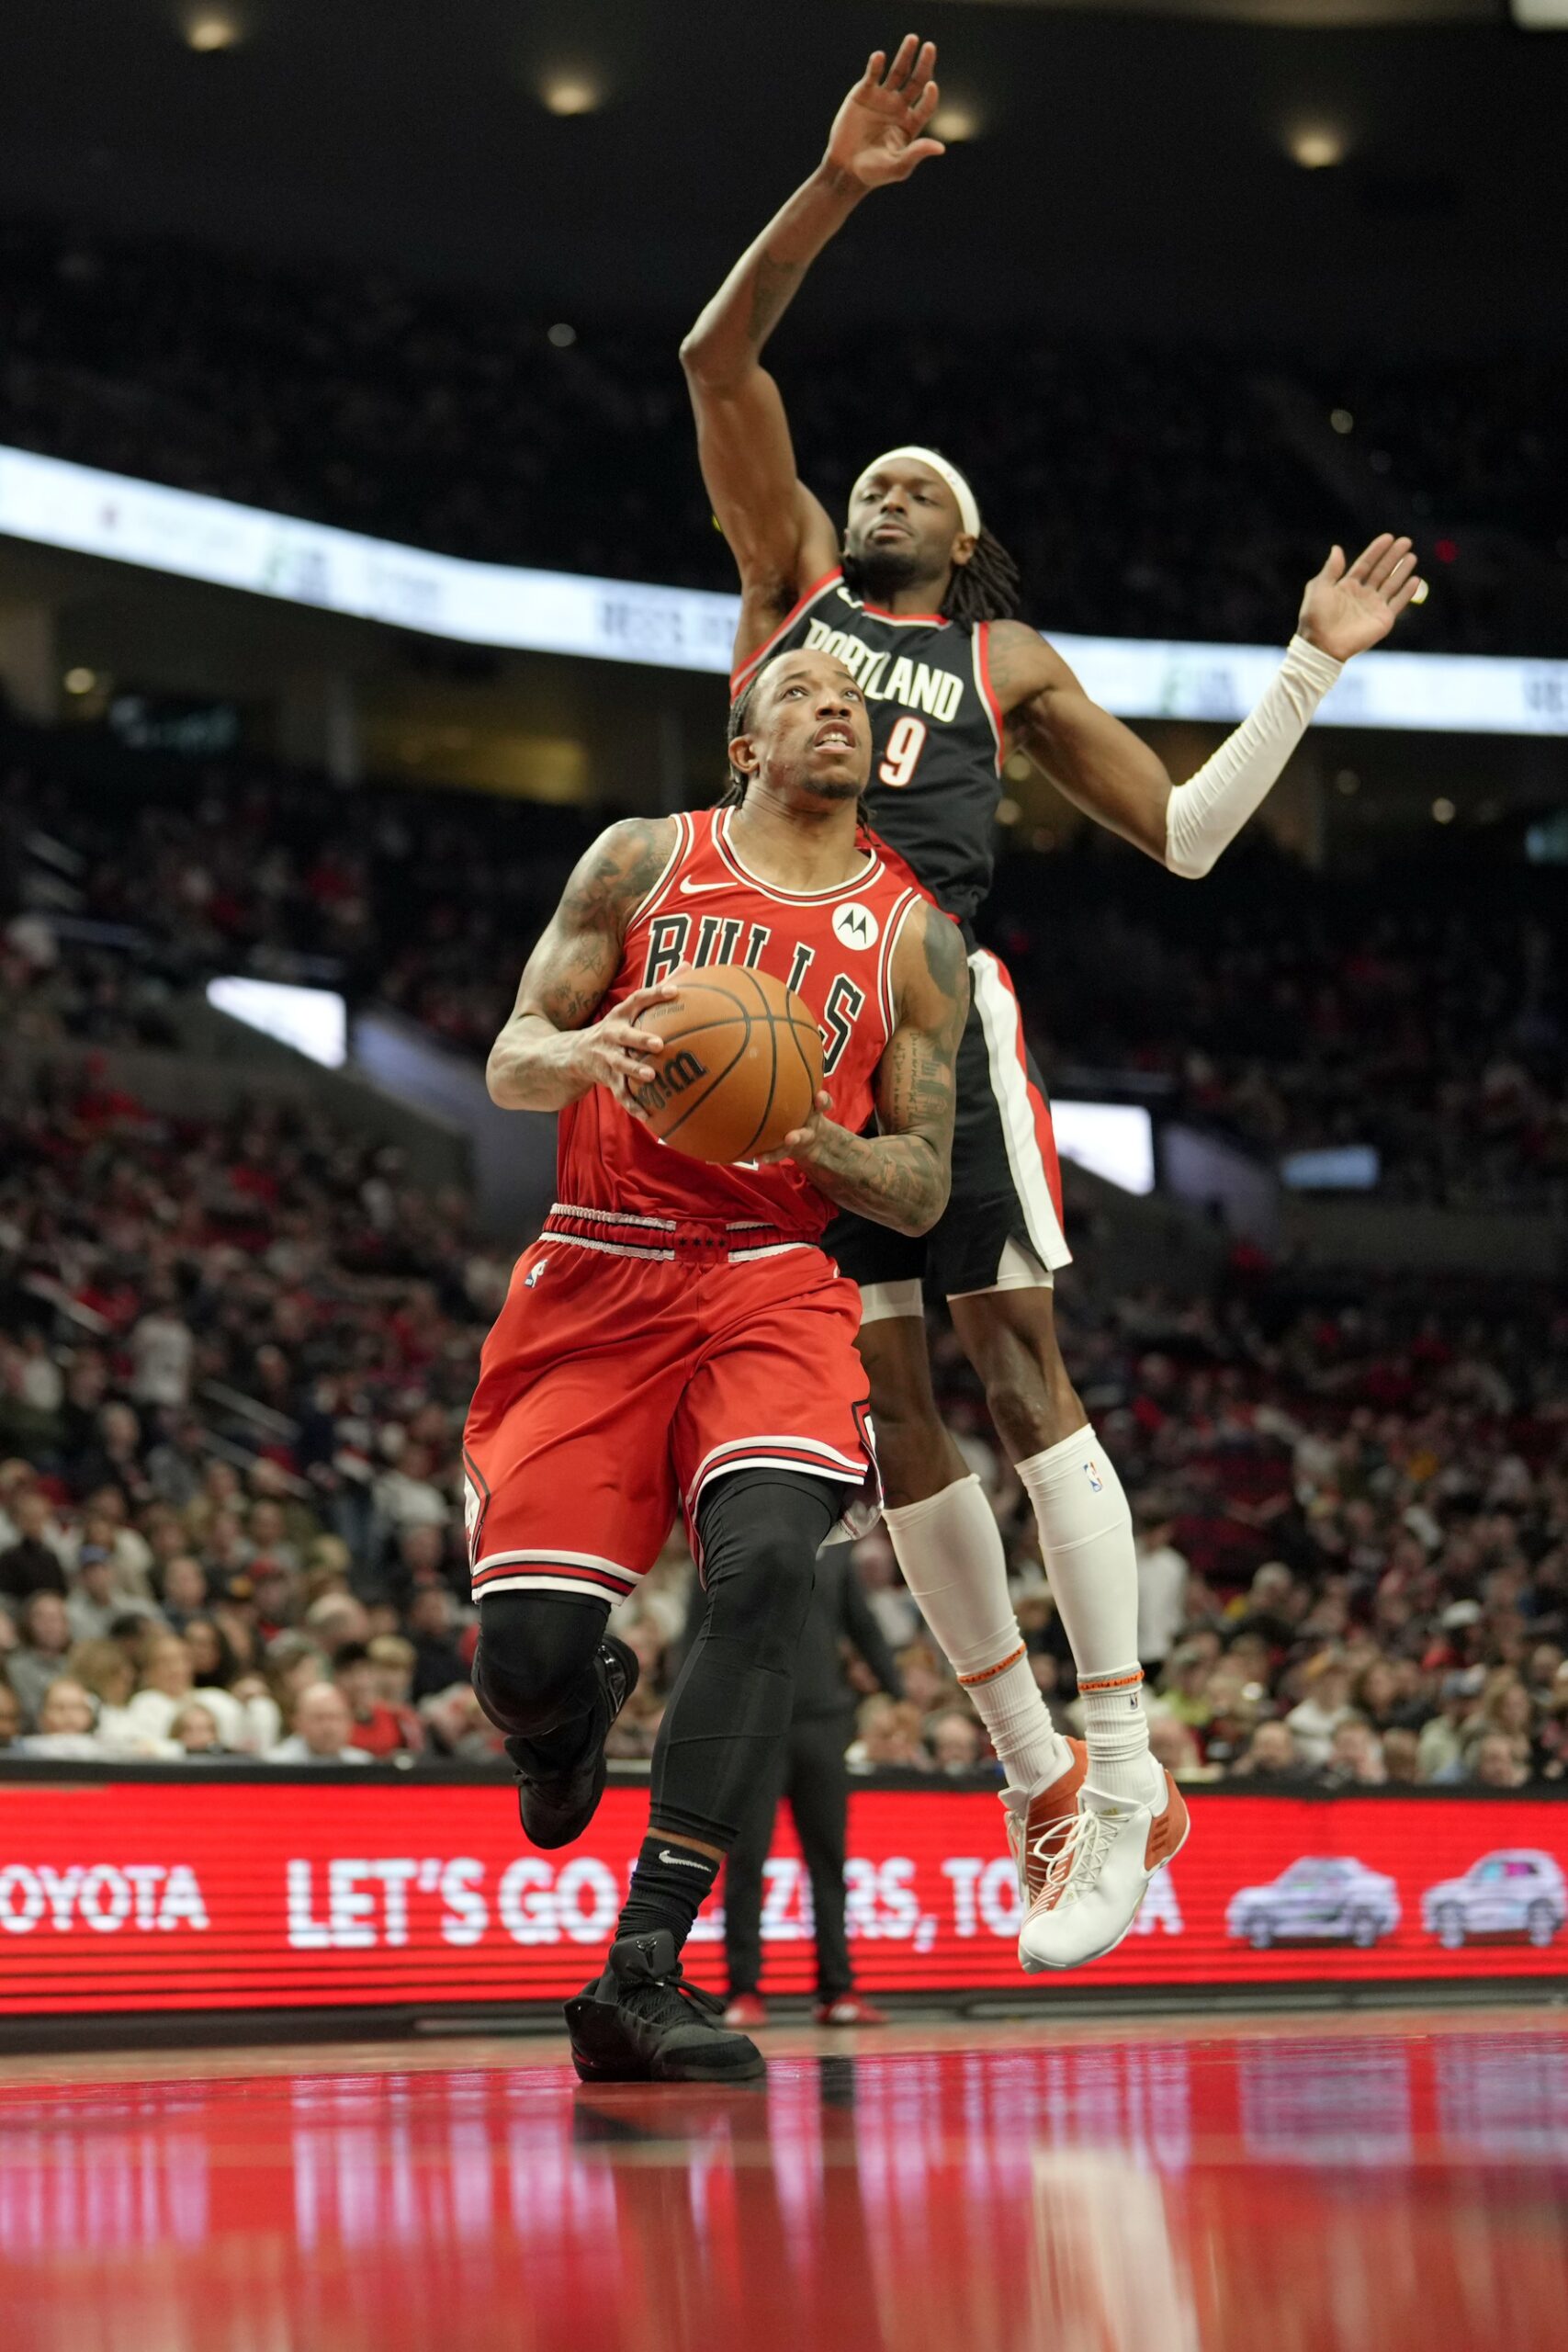 Chicago Bulls small forward DeMar DeRozan (11, left) drives to the basket under pressure from Portland Trail Blazers small forward Jerami Grant (9) during the first half at Moda Center.